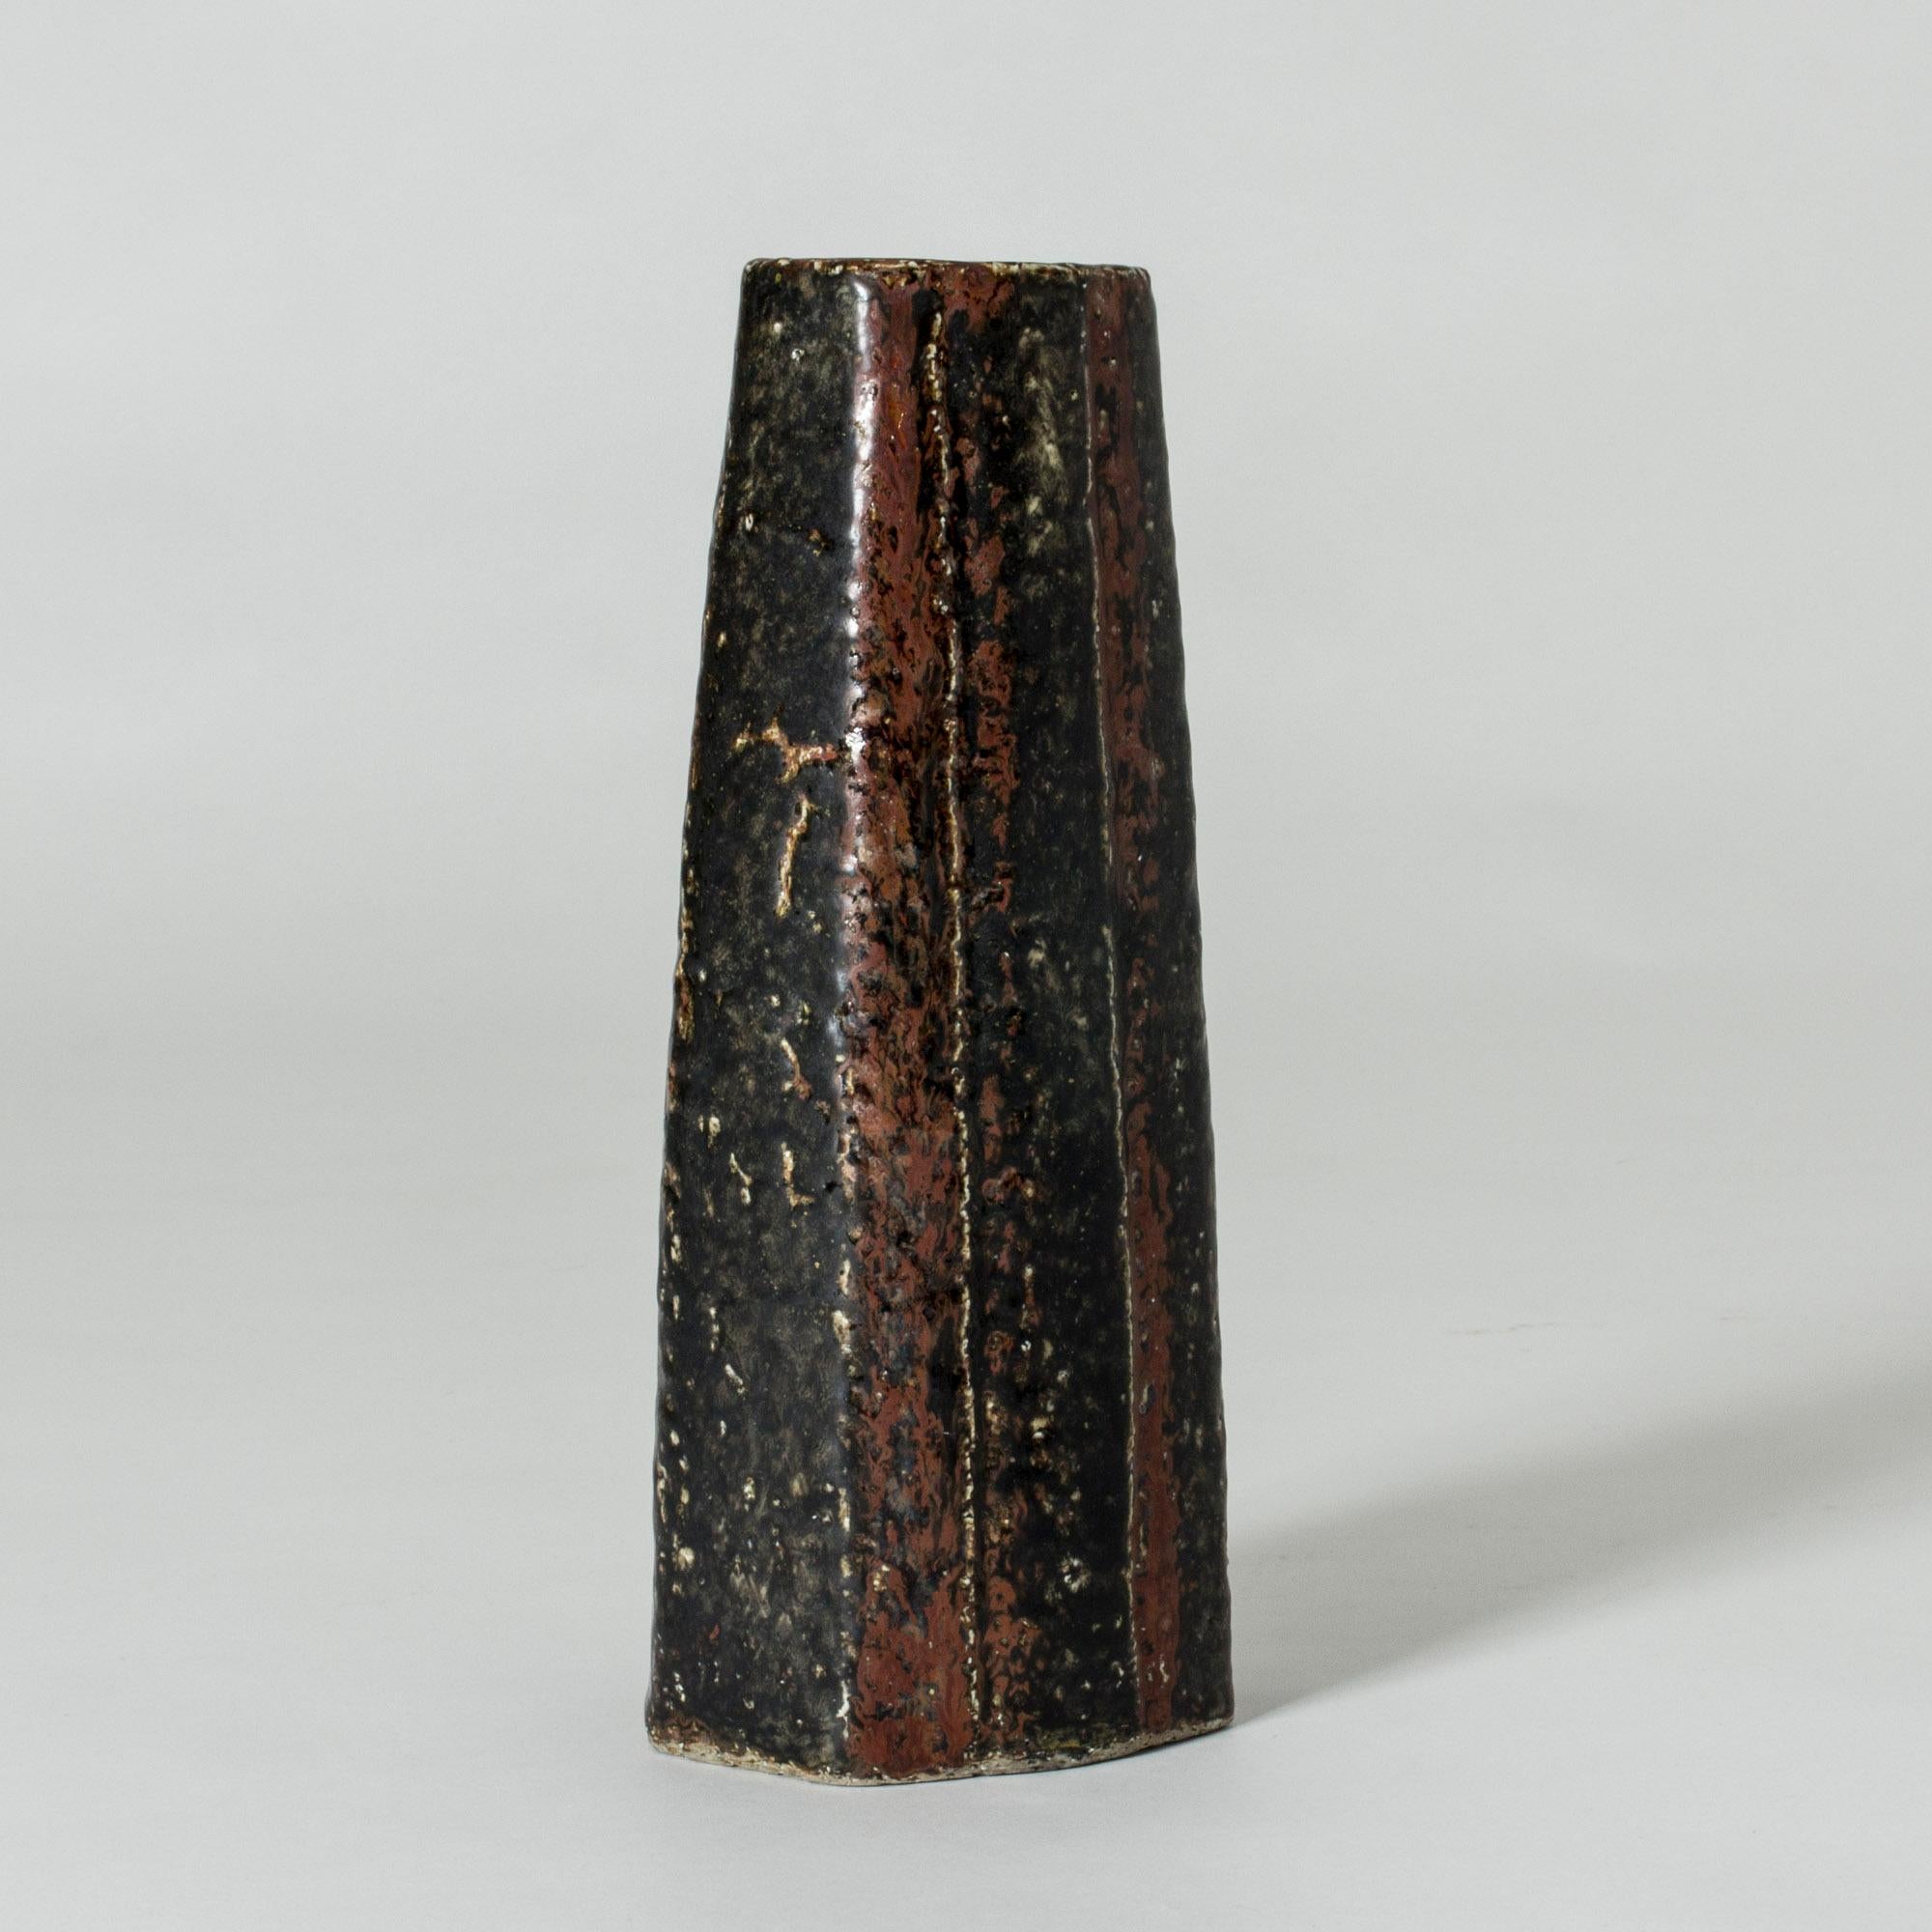 Striking unique chamotte vase by Carl-Harry Stålhane, in a brutal, deconstructed design with thick black and rusty red glazes. This is an example of Stålhane’s artistic style of the 1960s, with bold, rough shapes that stood in contrast to the